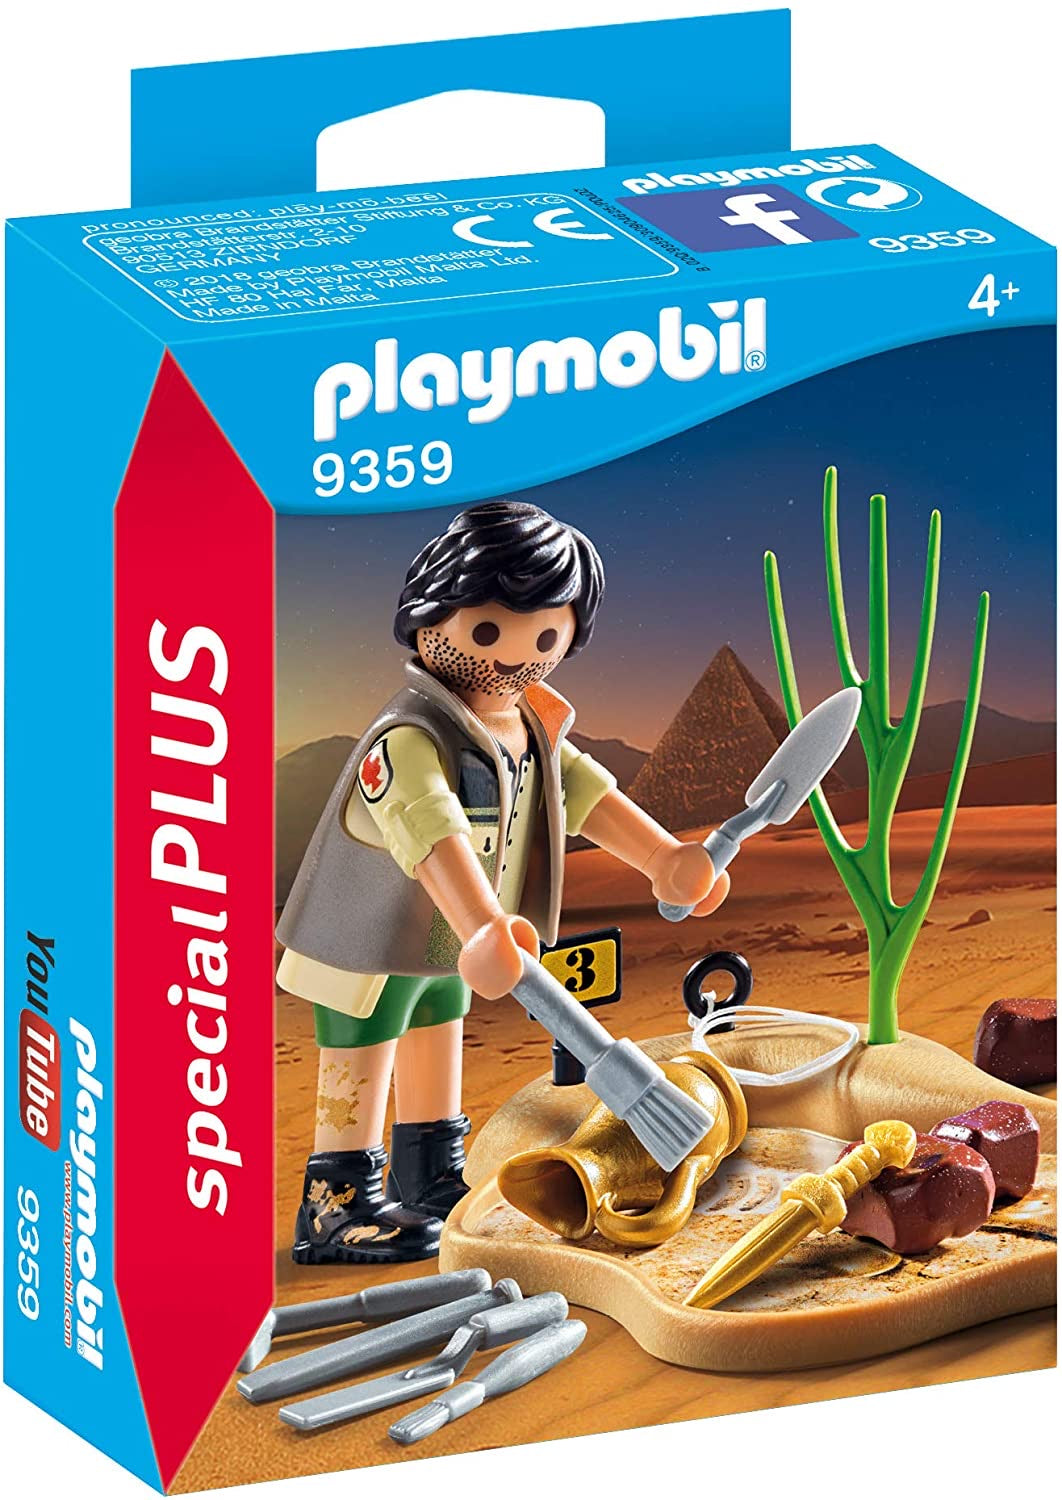 Archeologist by PLAYMOBIL #9359